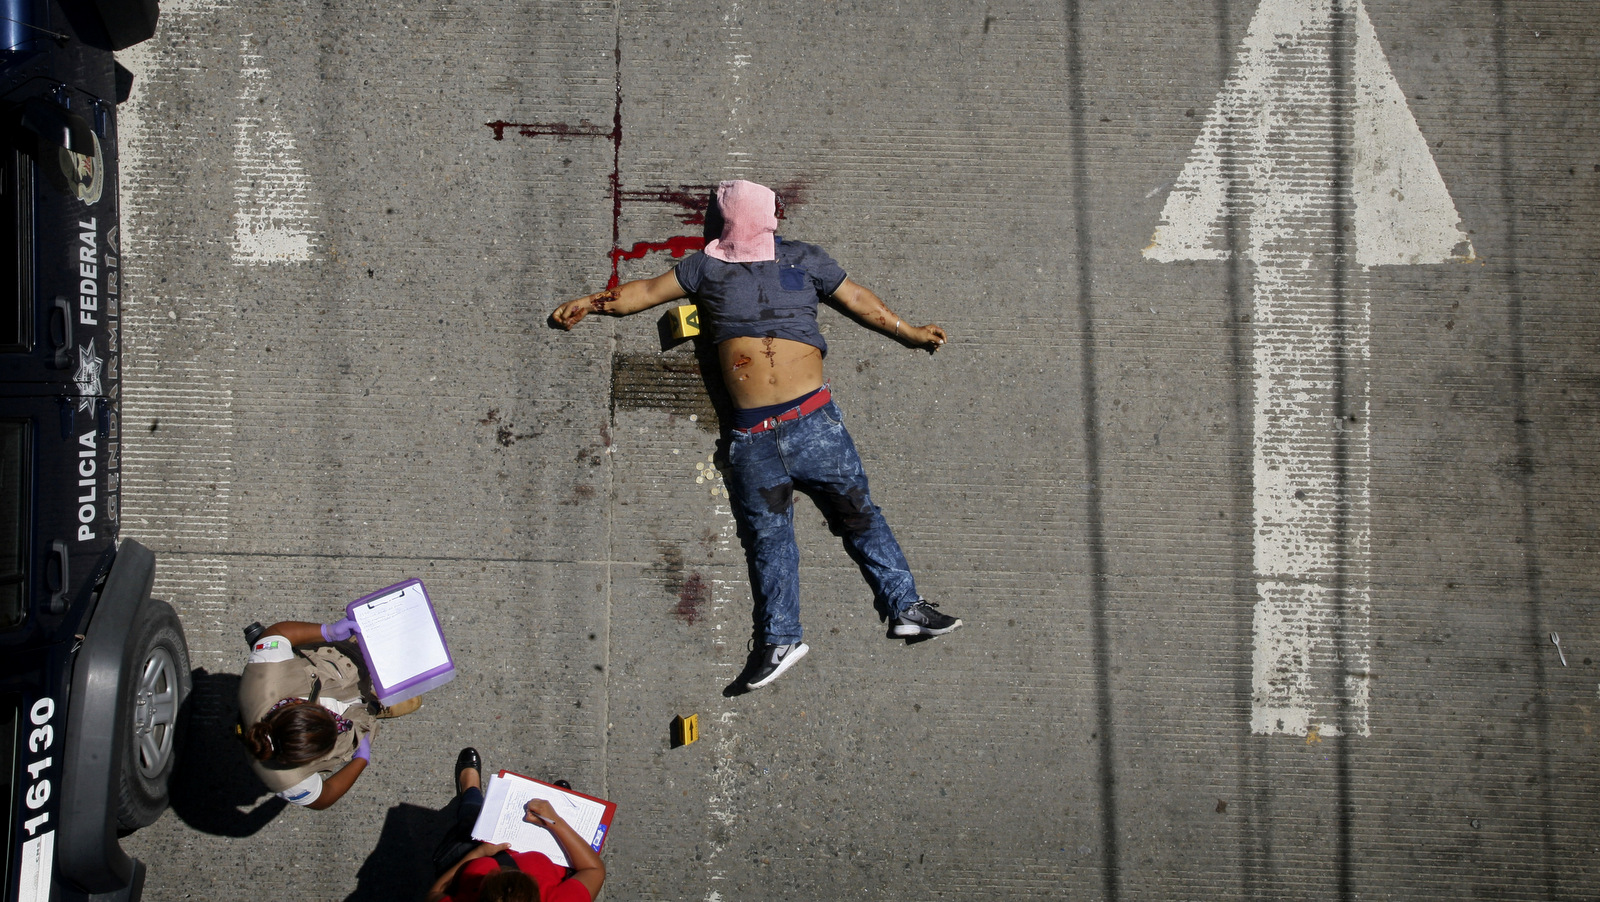 Police investigators take notes by the body of a man shot in broad daylight in Acapulco, Mexico, Aug. 13, 2017. (AP/Bernandino Hernandez)